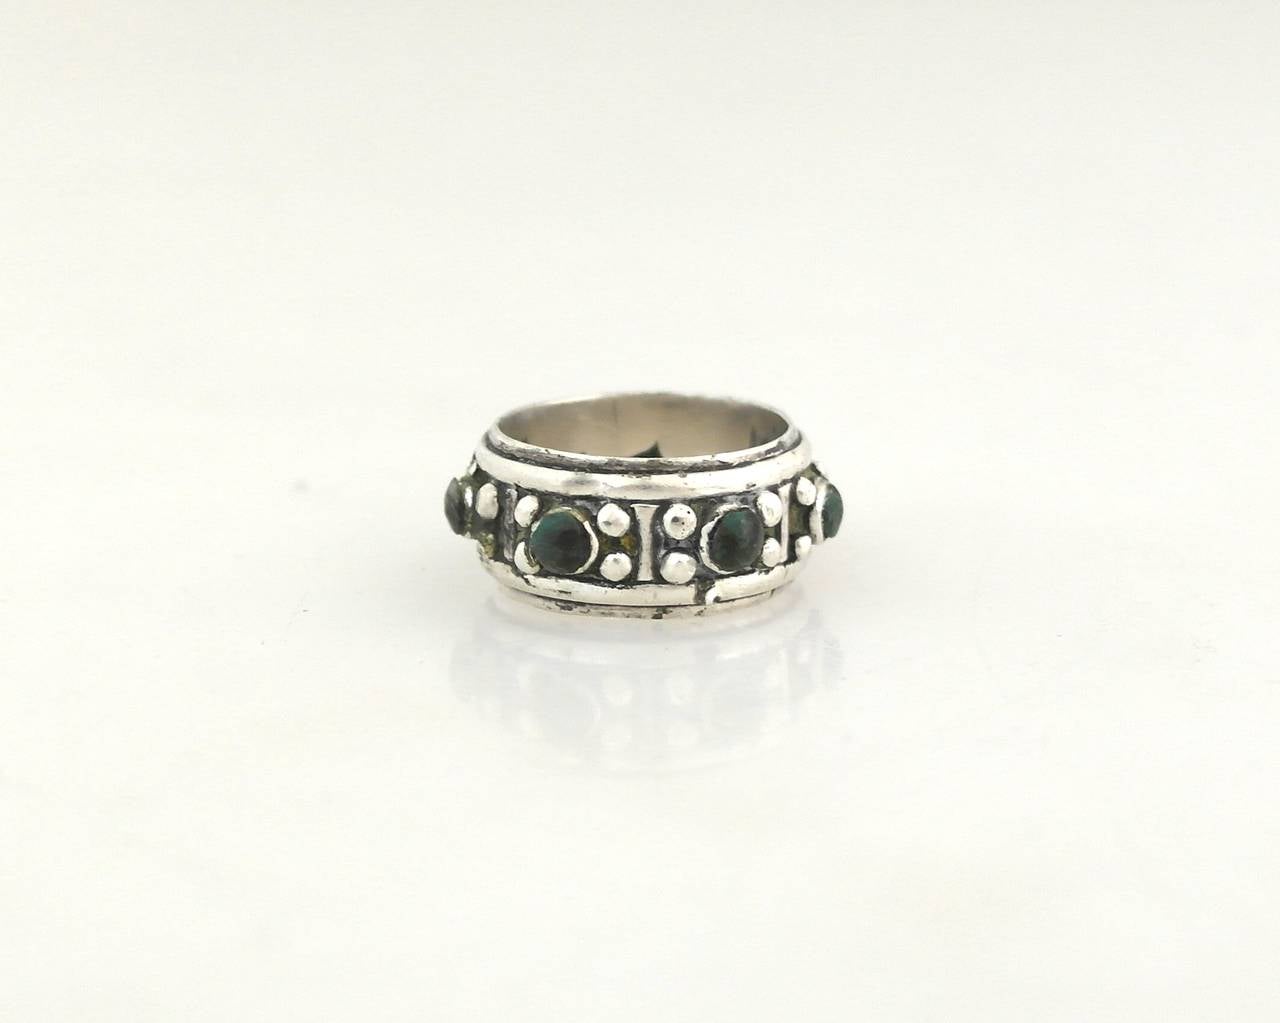 Being offered is a .970 silver ring by Antonio Pineda of Taxco, Mexico. Band ring decorated with beaded accents & applied Mexican jade stones. Dimensions:     Marked as illustrated. In excellent condition.

Stanley Szaro Antonio Pineda